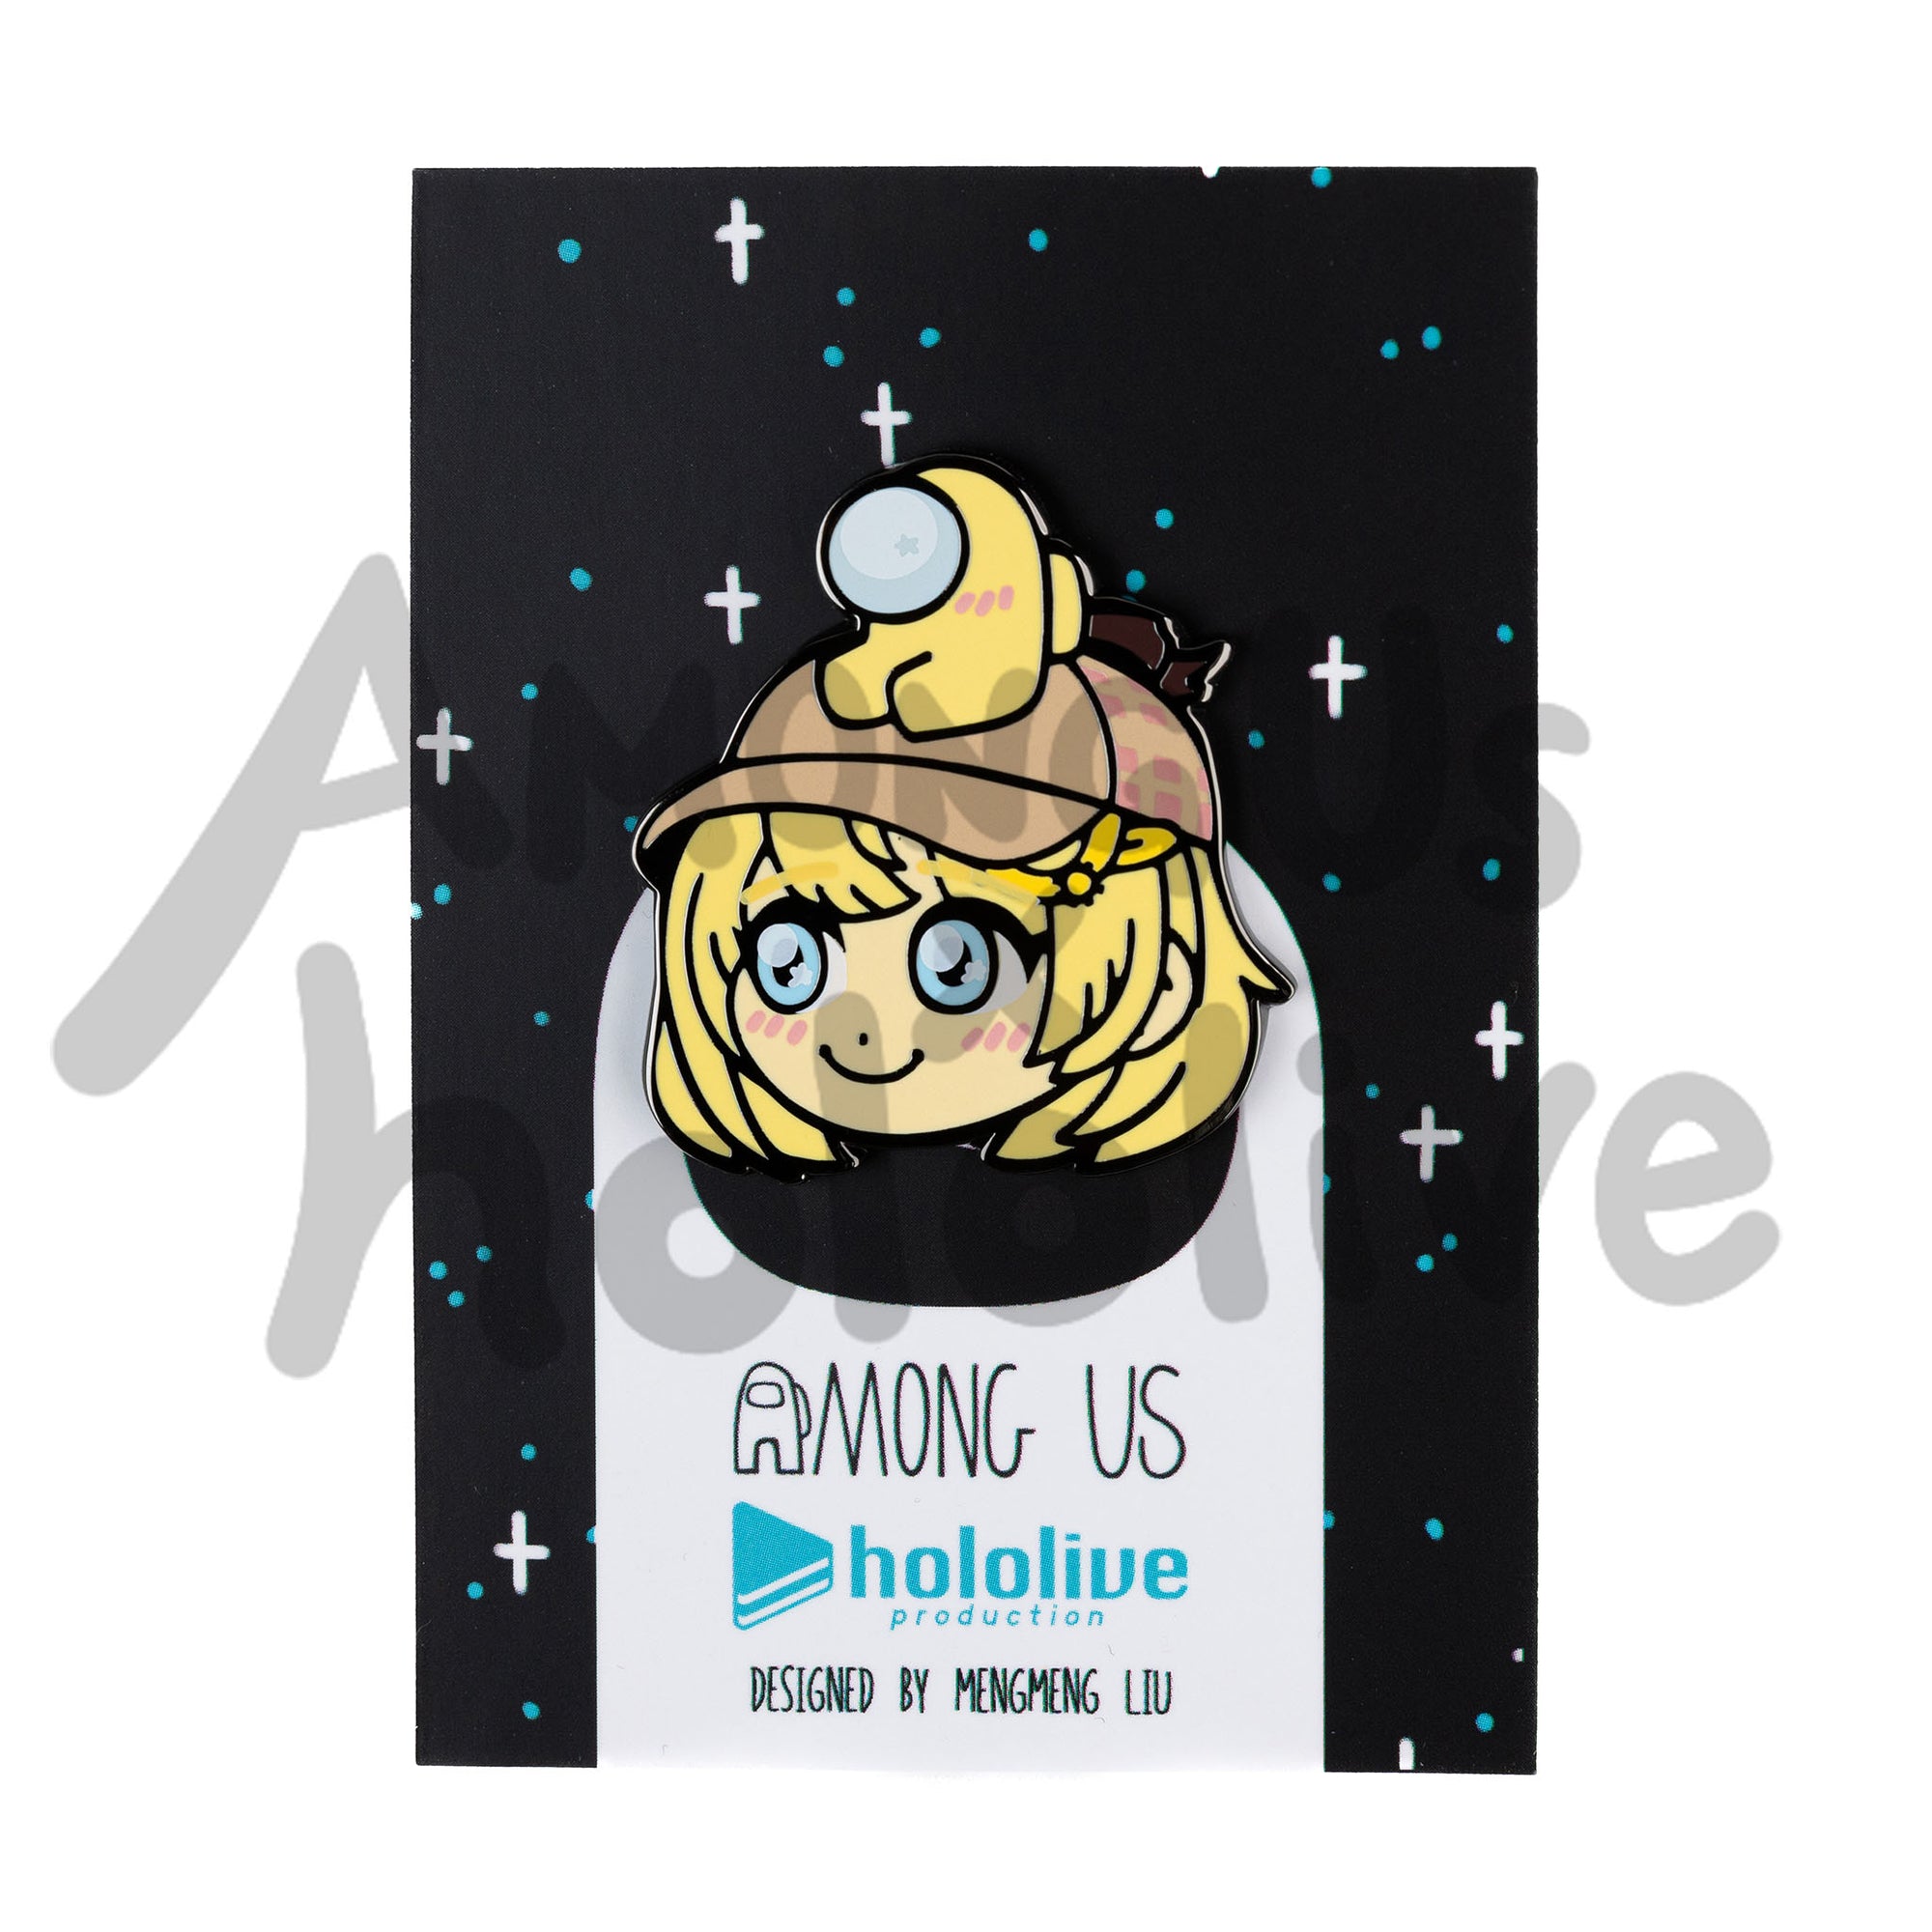 Enamel Pin of Watson Amelia's Face from Hololive.Amelia has fair skin, cyan sparkly eyes, and yellow bobbed hair. She wears a tan baseball cap. There's a Yellow crewmate sitting atop her head. Both characters have pink blush marks on their faces.